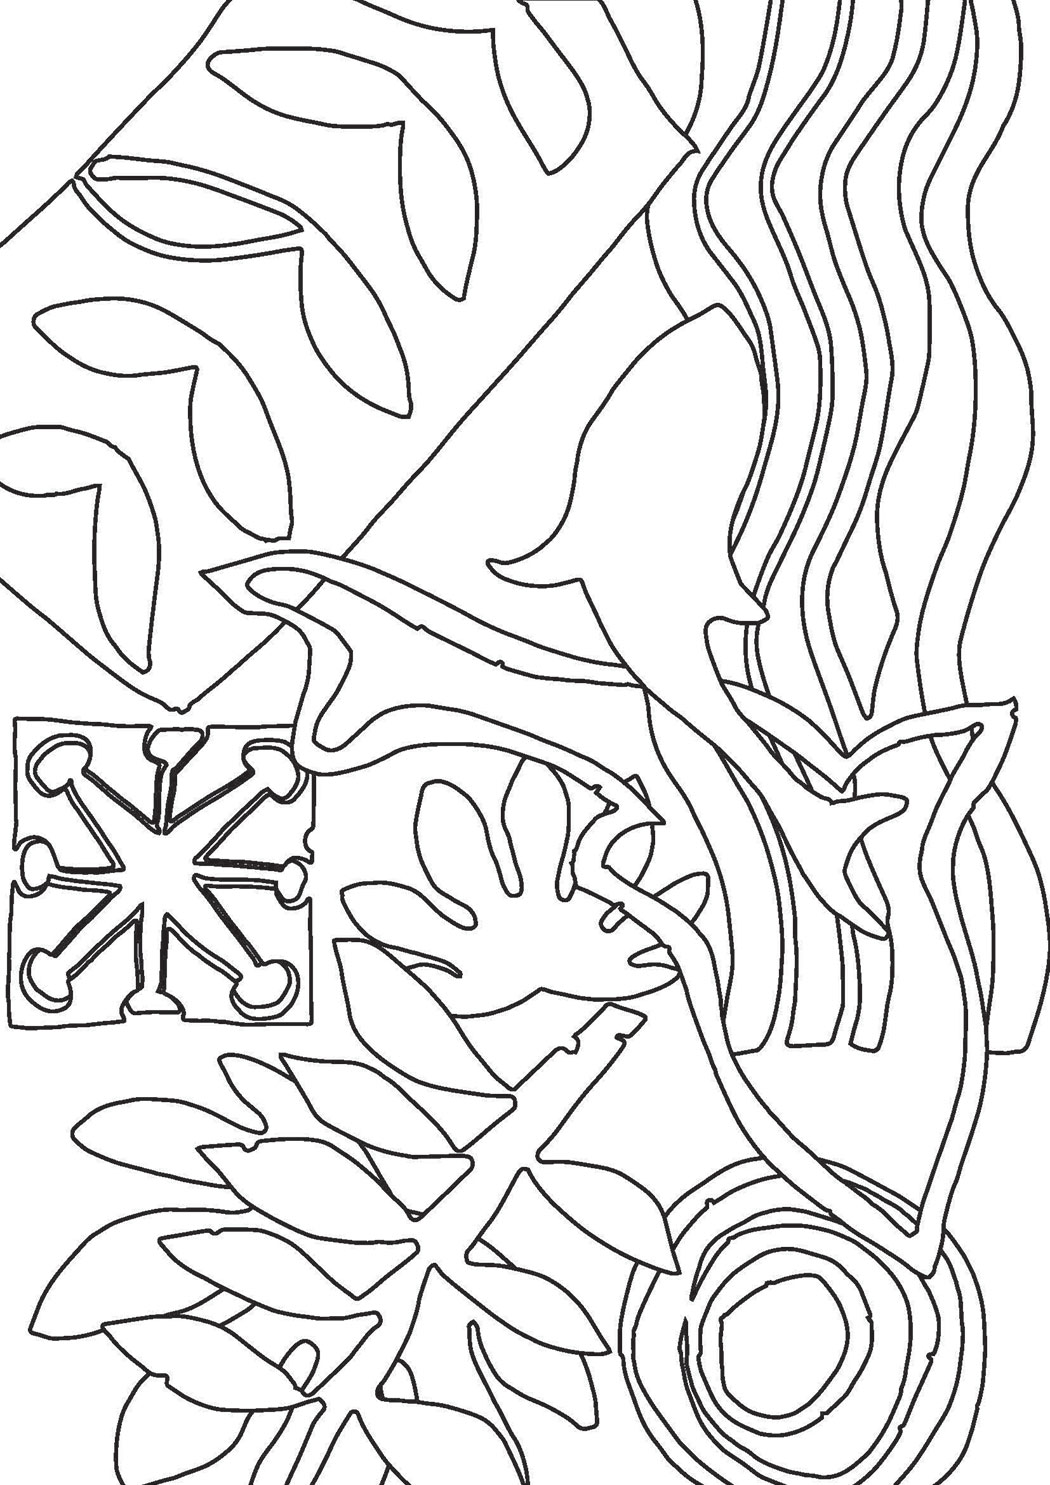 Matisse inspired colouring | ArtCare